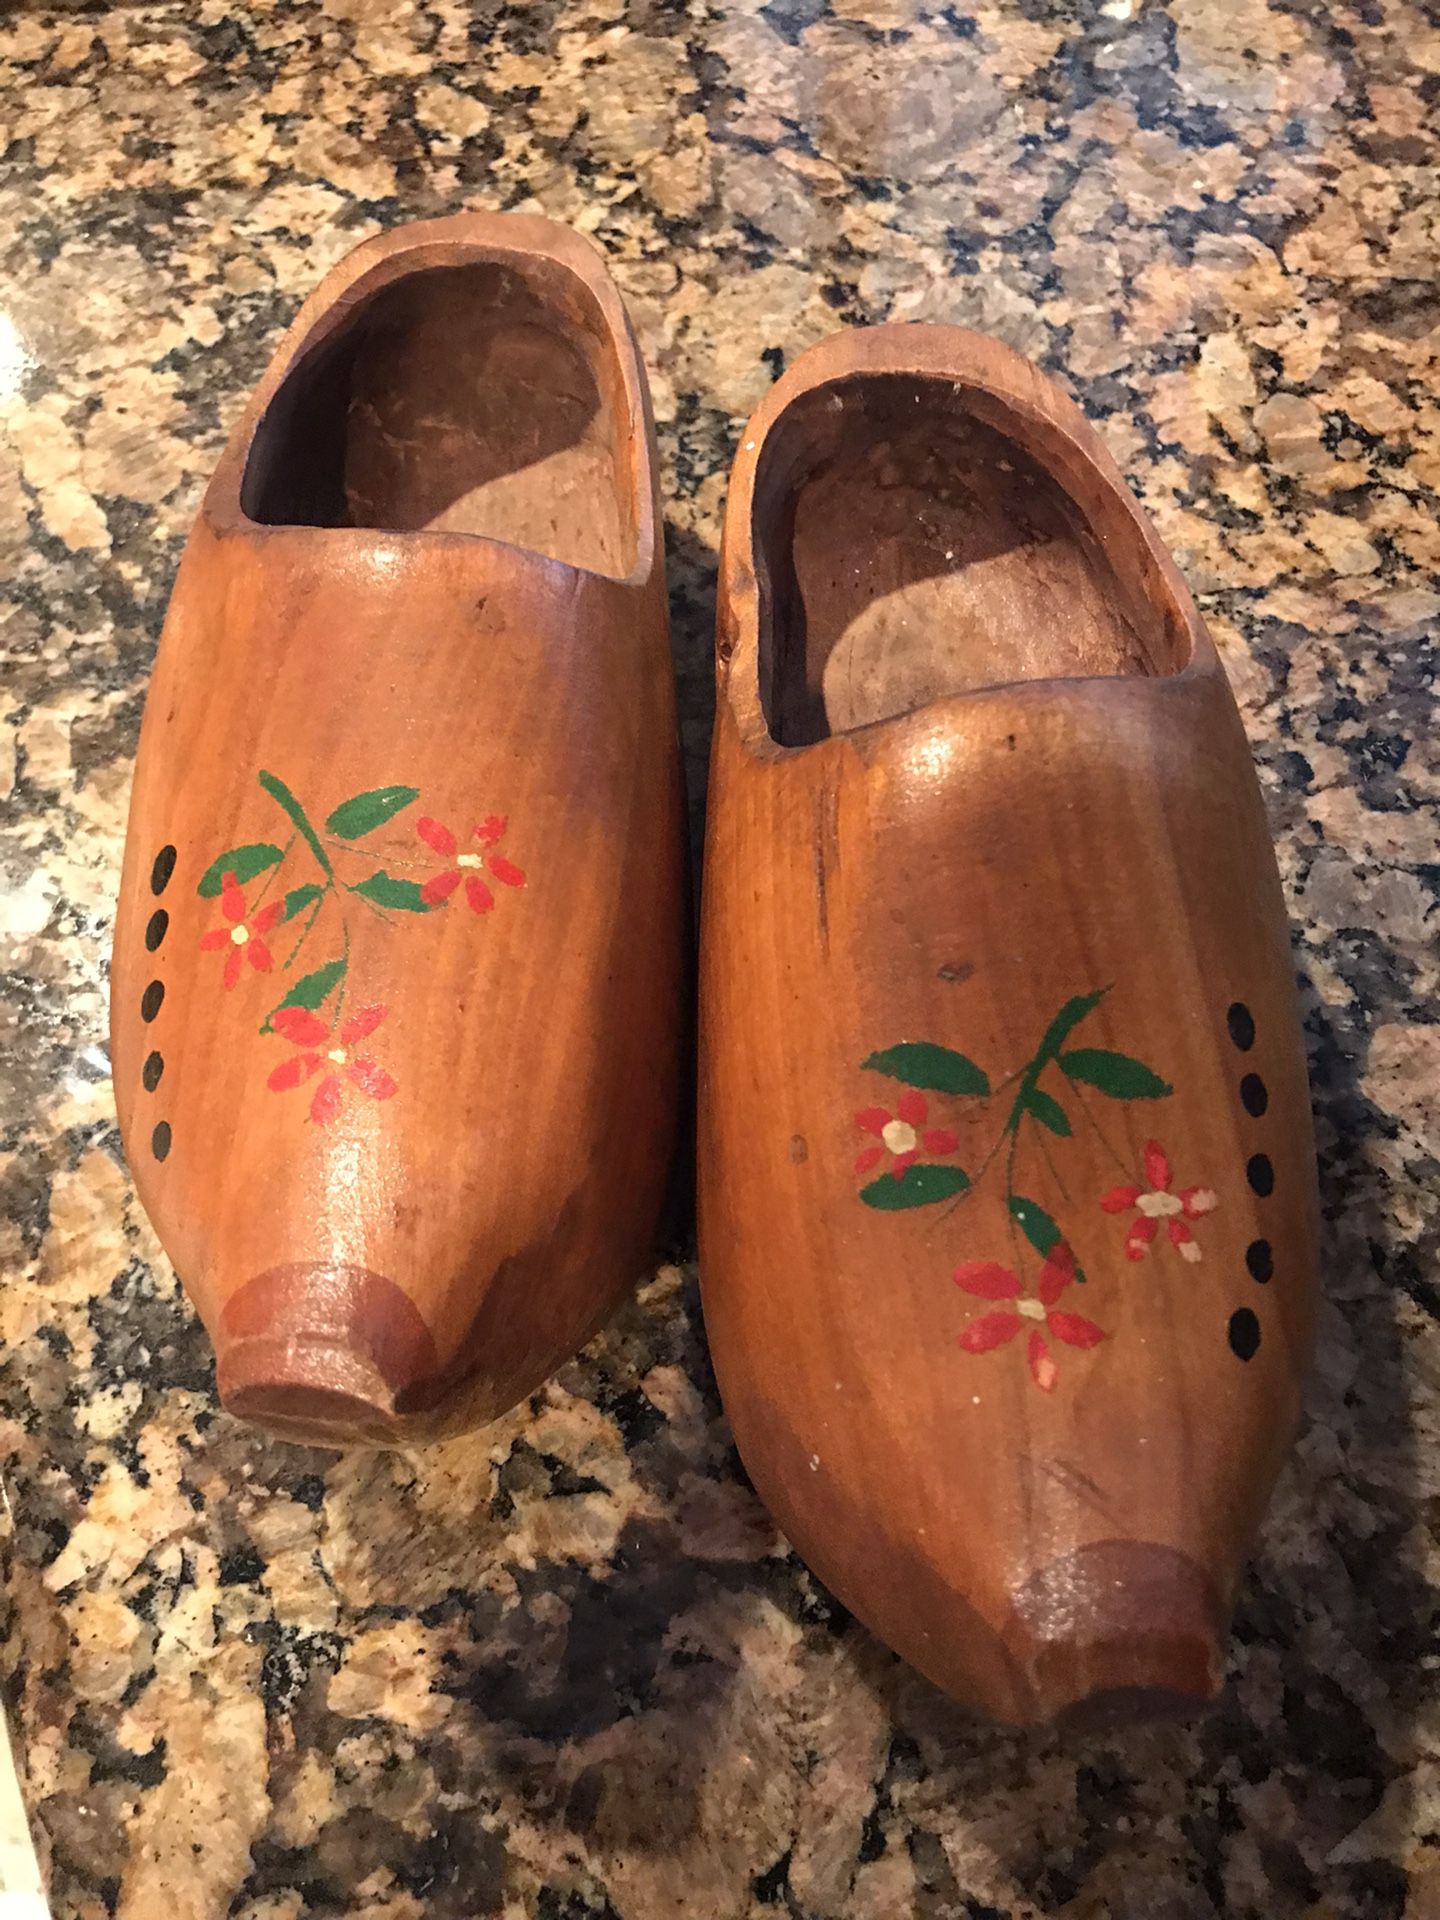 Authentic Dutch clogs made of wood from Holland